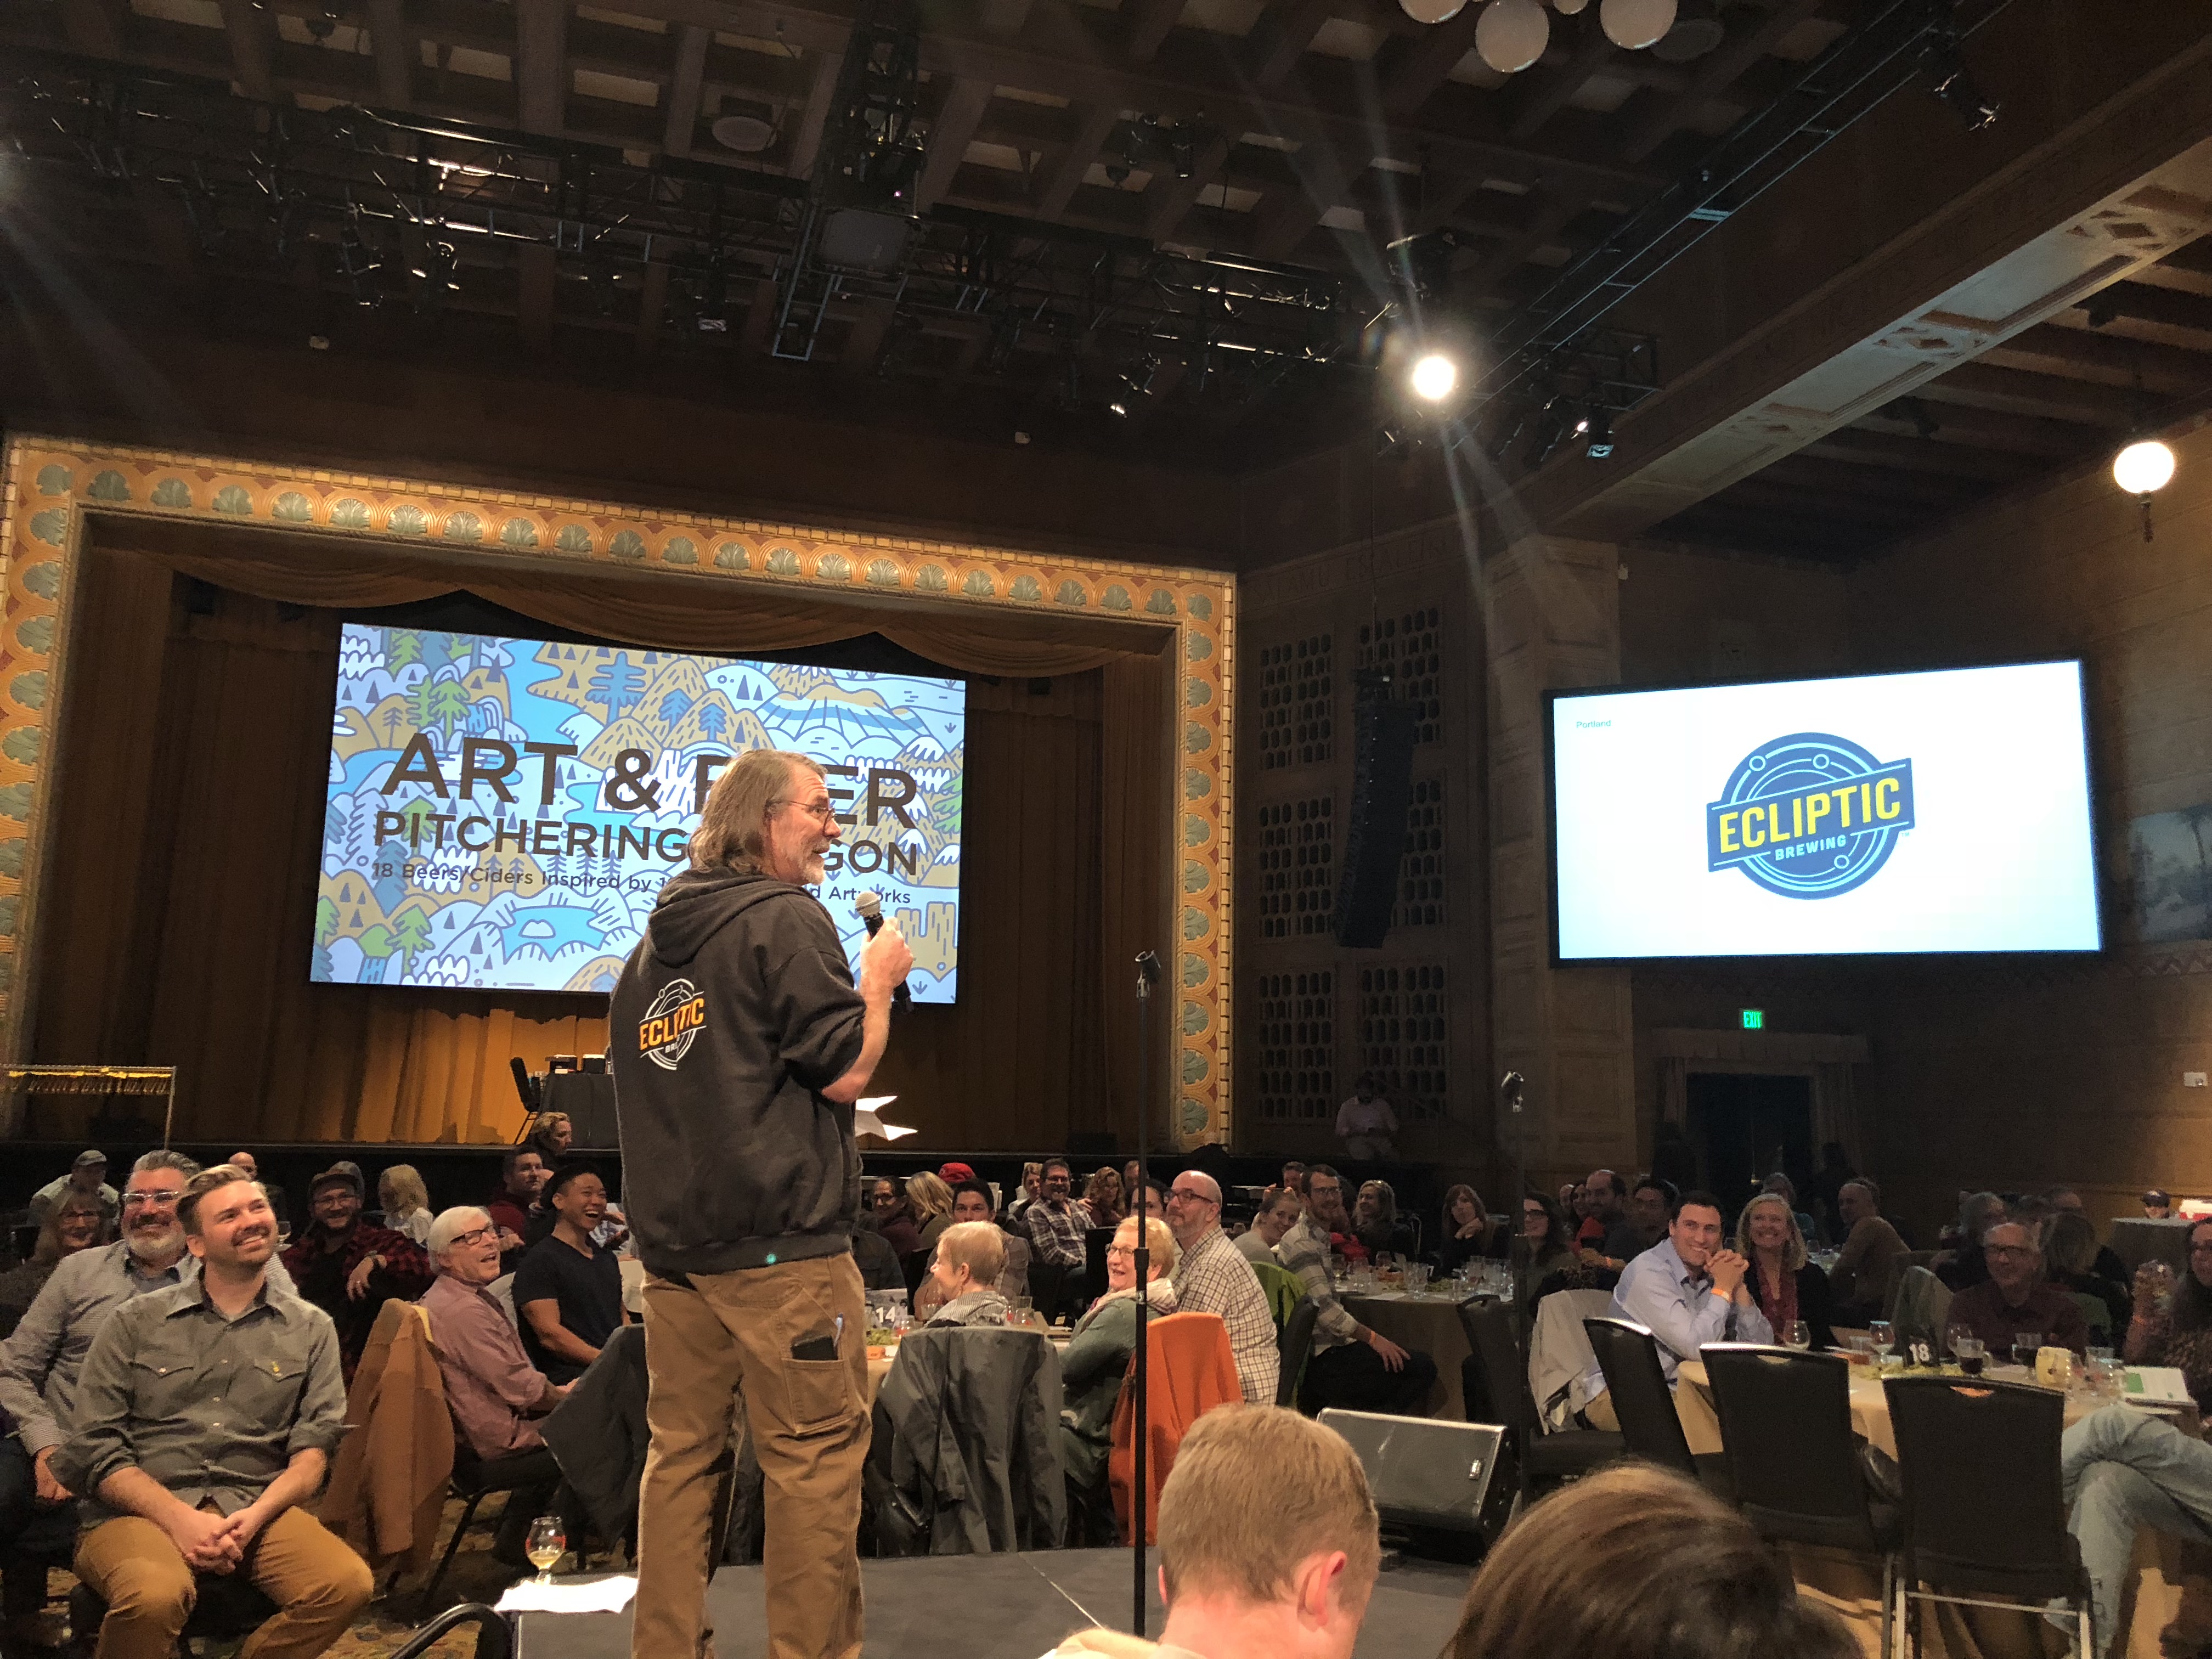 Phil Roche from Ecliptic Brewing speaking during Art & Beer at the Portland Art Museum.